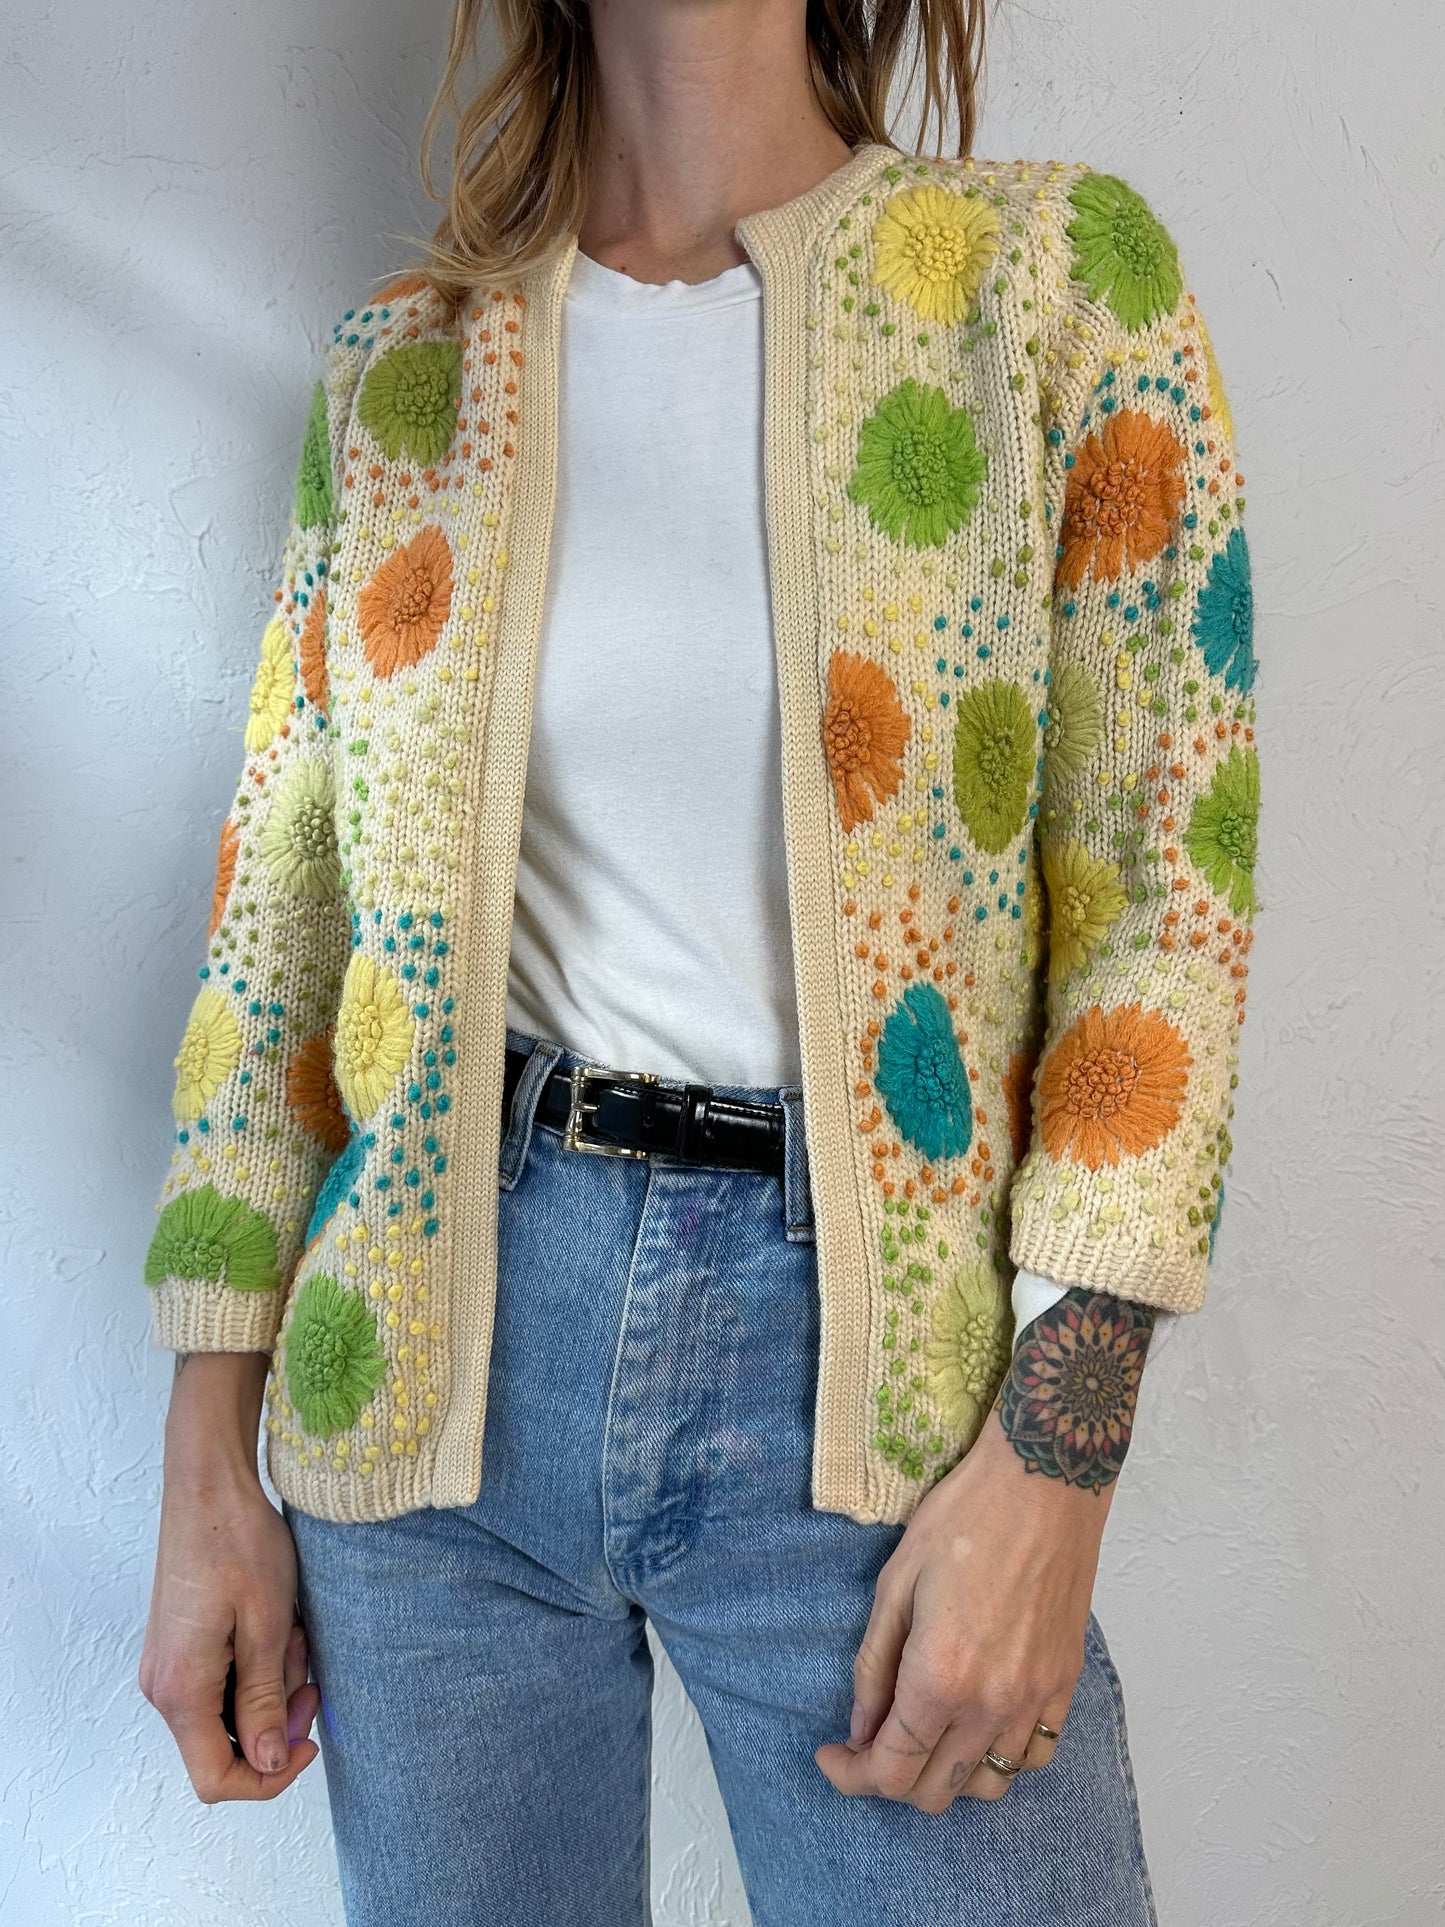 Vintage Hand Knit Cream Embroidered Cardigan Sweater / Small